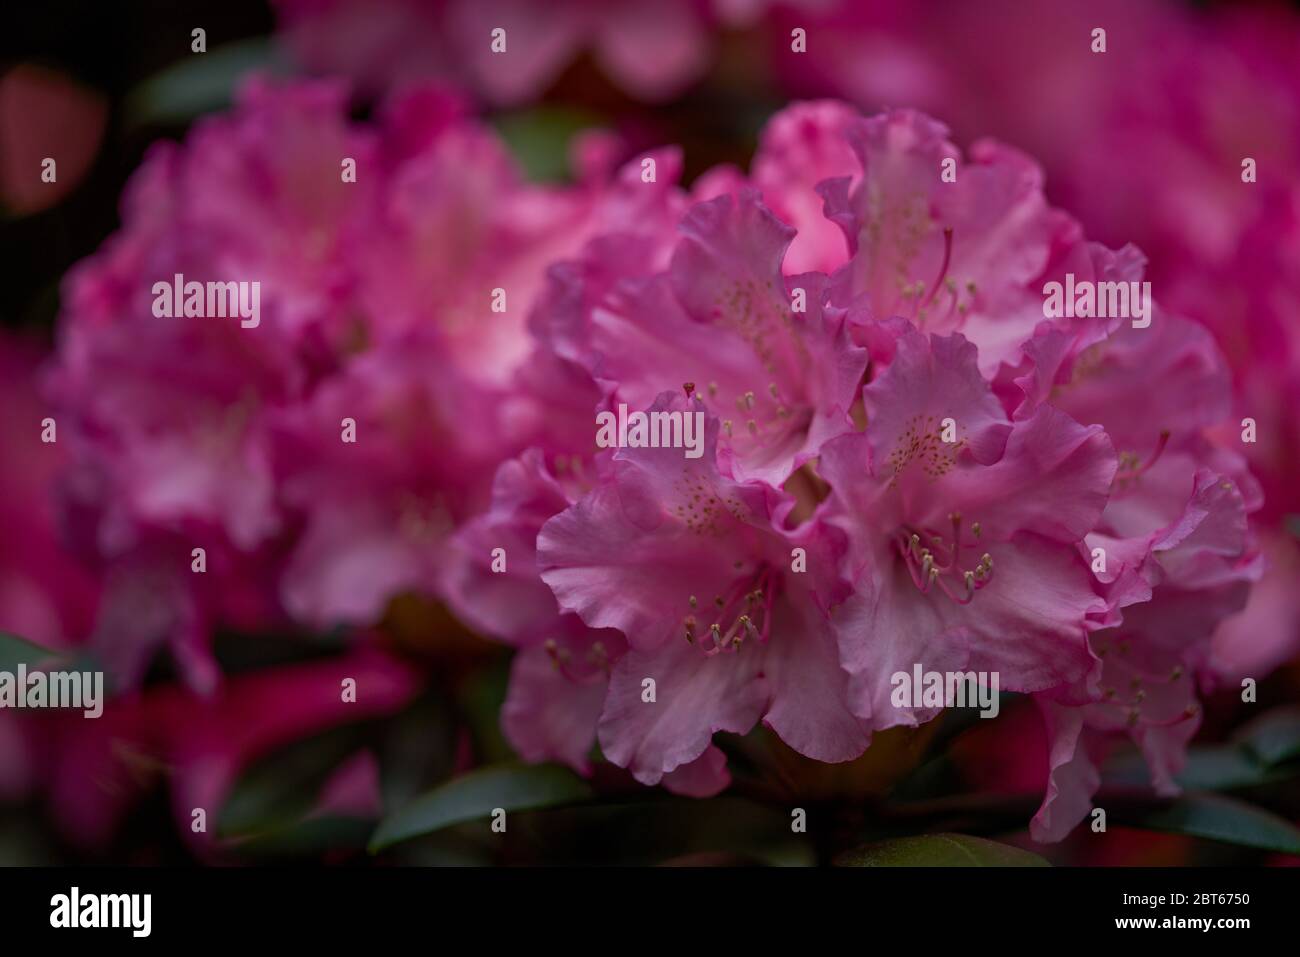 Lush Rhododendron Germania dark pink blossom close up Stock Photo